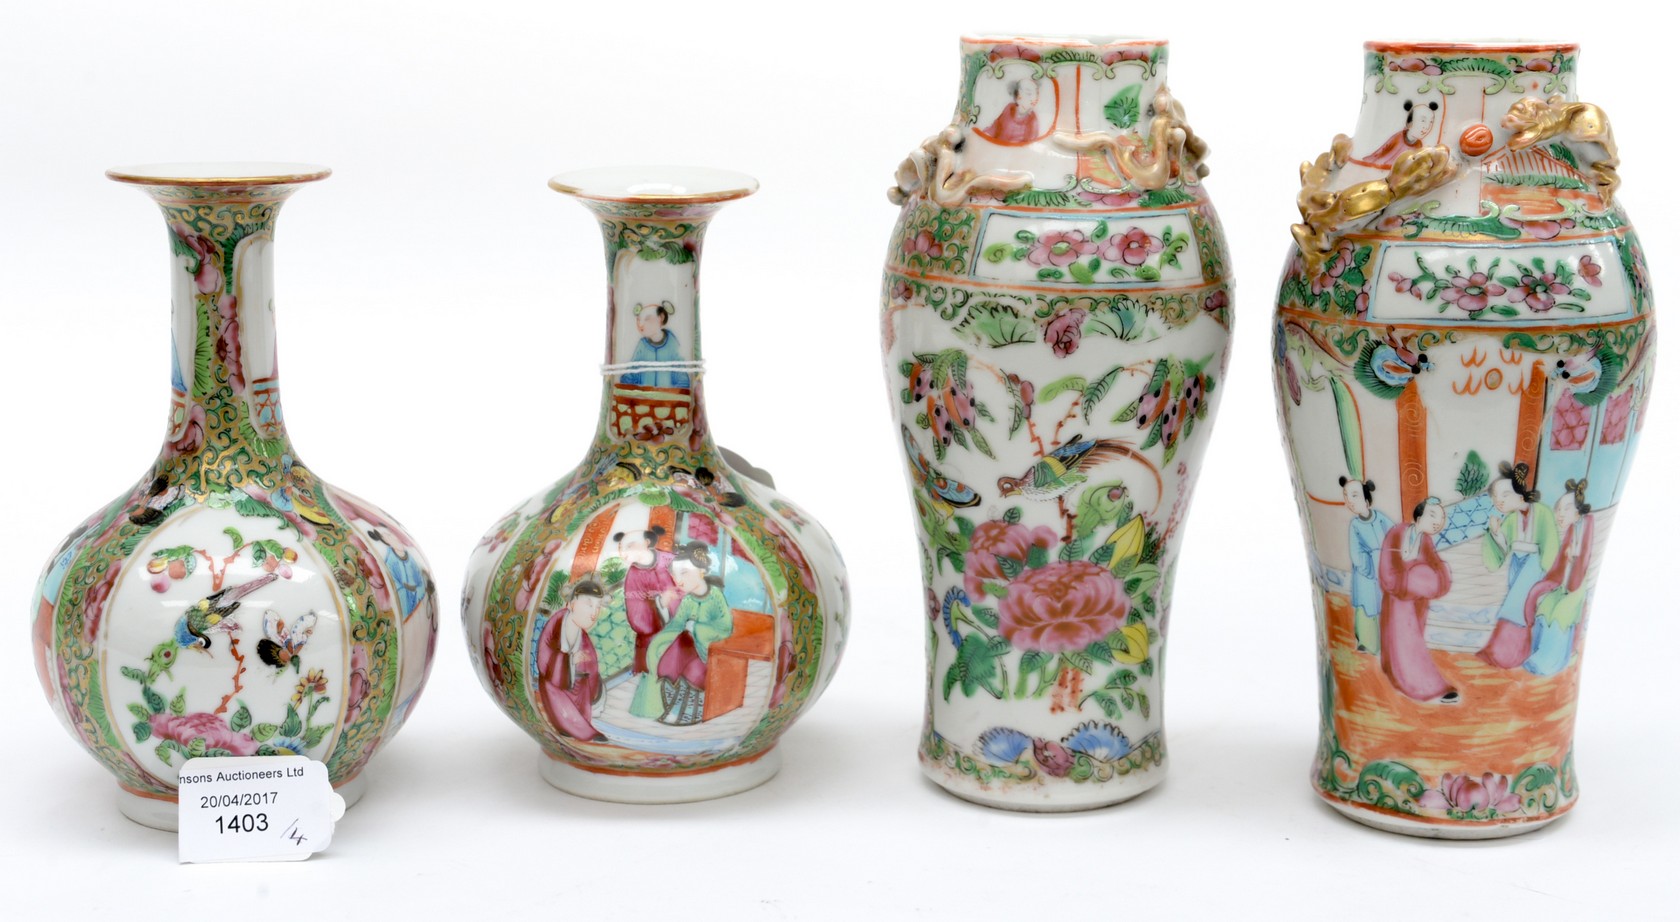 Two pairs of Cantonese vases,